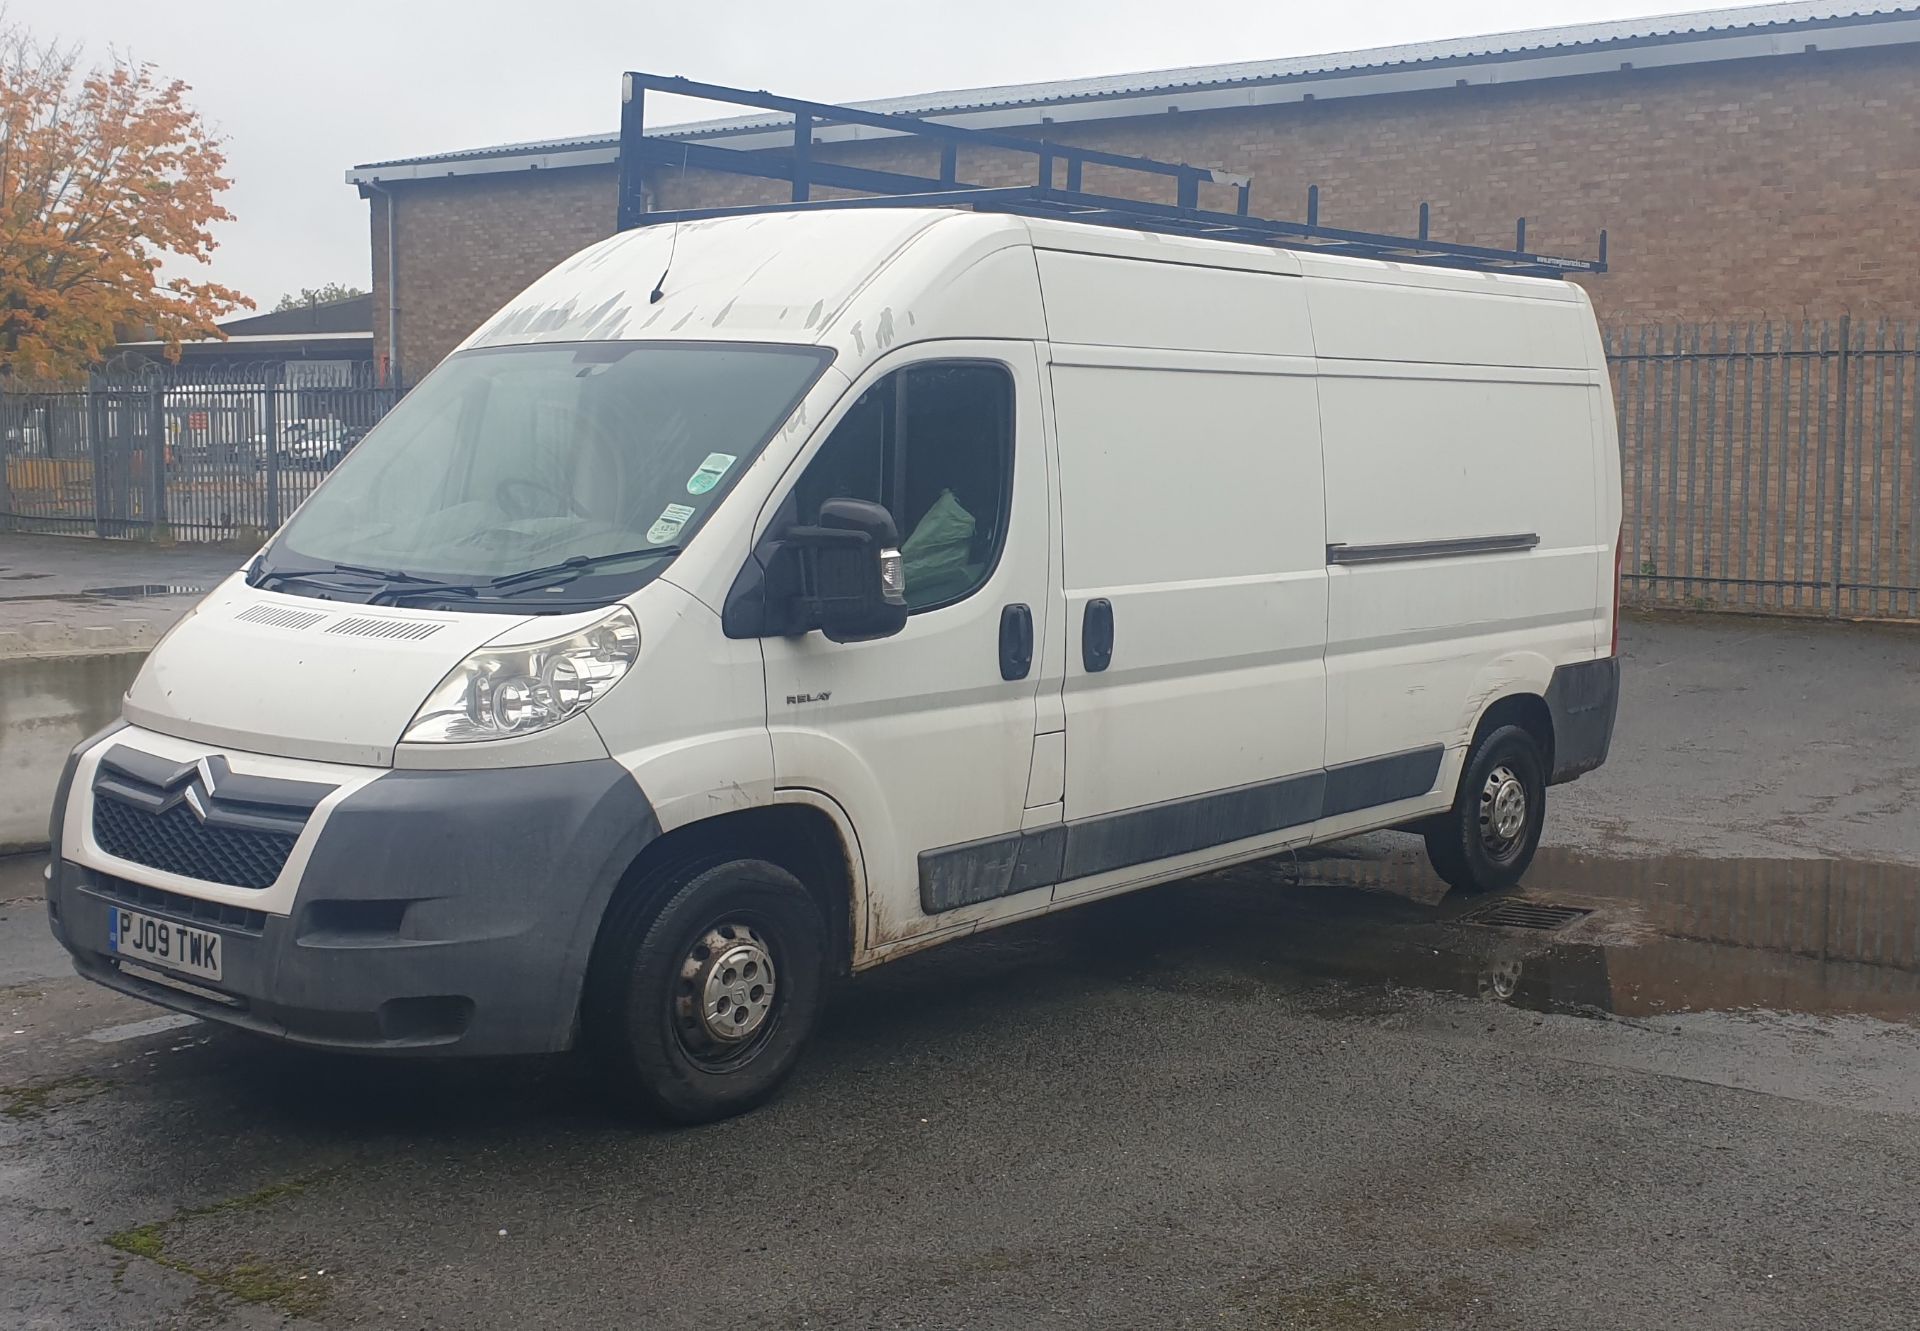 2009 Citroen Relay 35 HDI 120 LWB panel van with glass racks to side and roof - Image 15 of 30